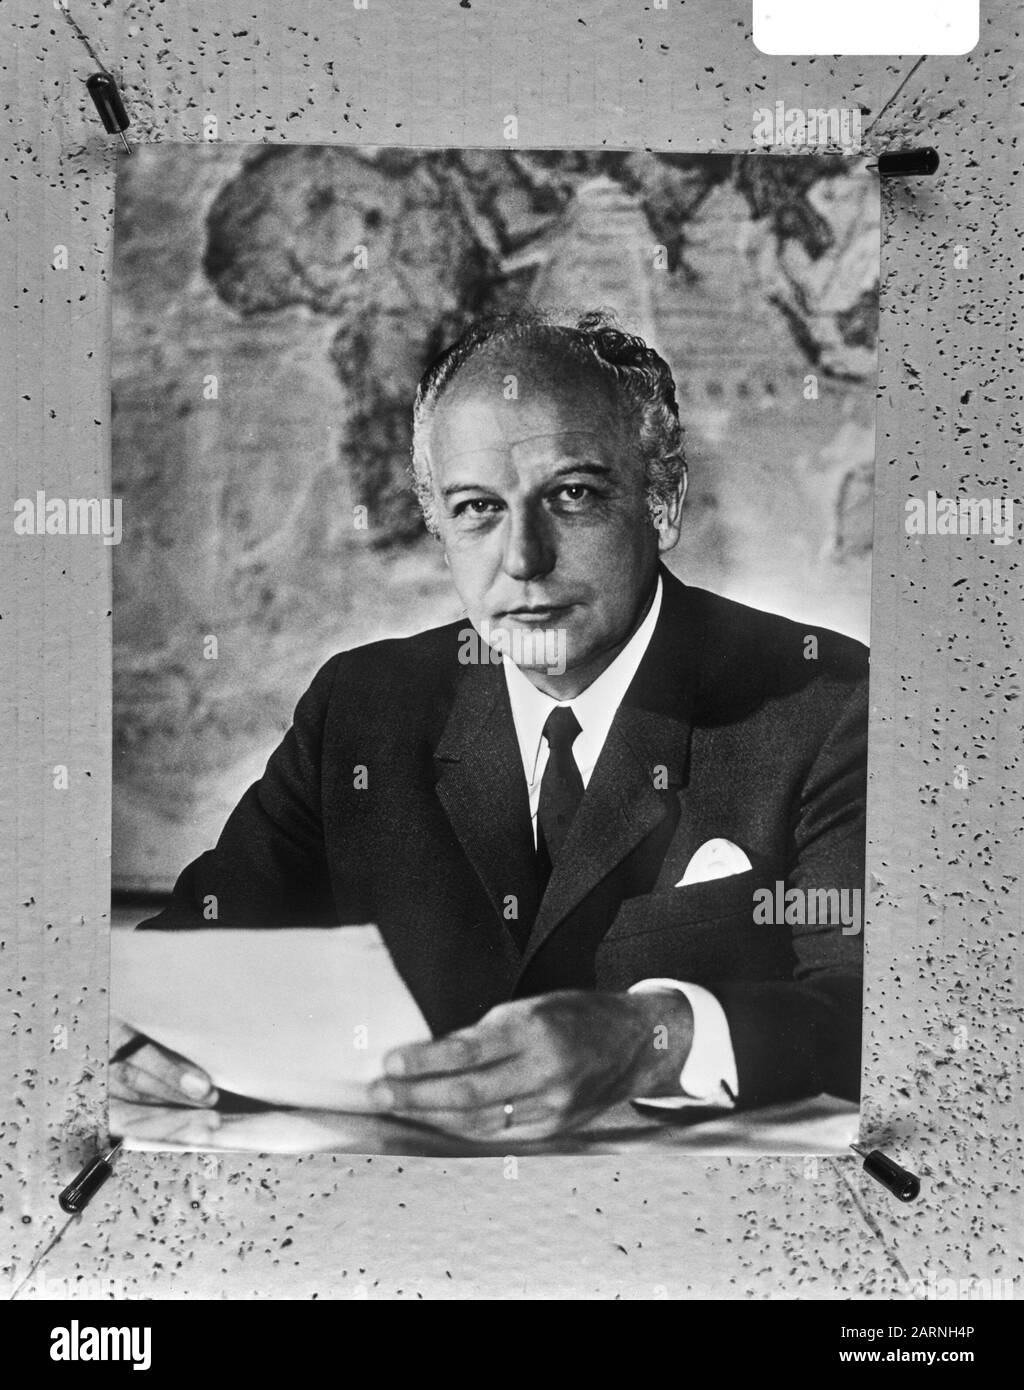 Walter Scheel, Minister of Foreign Affairs, West Germany Date: November 3, 1971 Location: B.R.D., Germany Keywords: ministers Personal name: Scheel, Walter Stock Photo